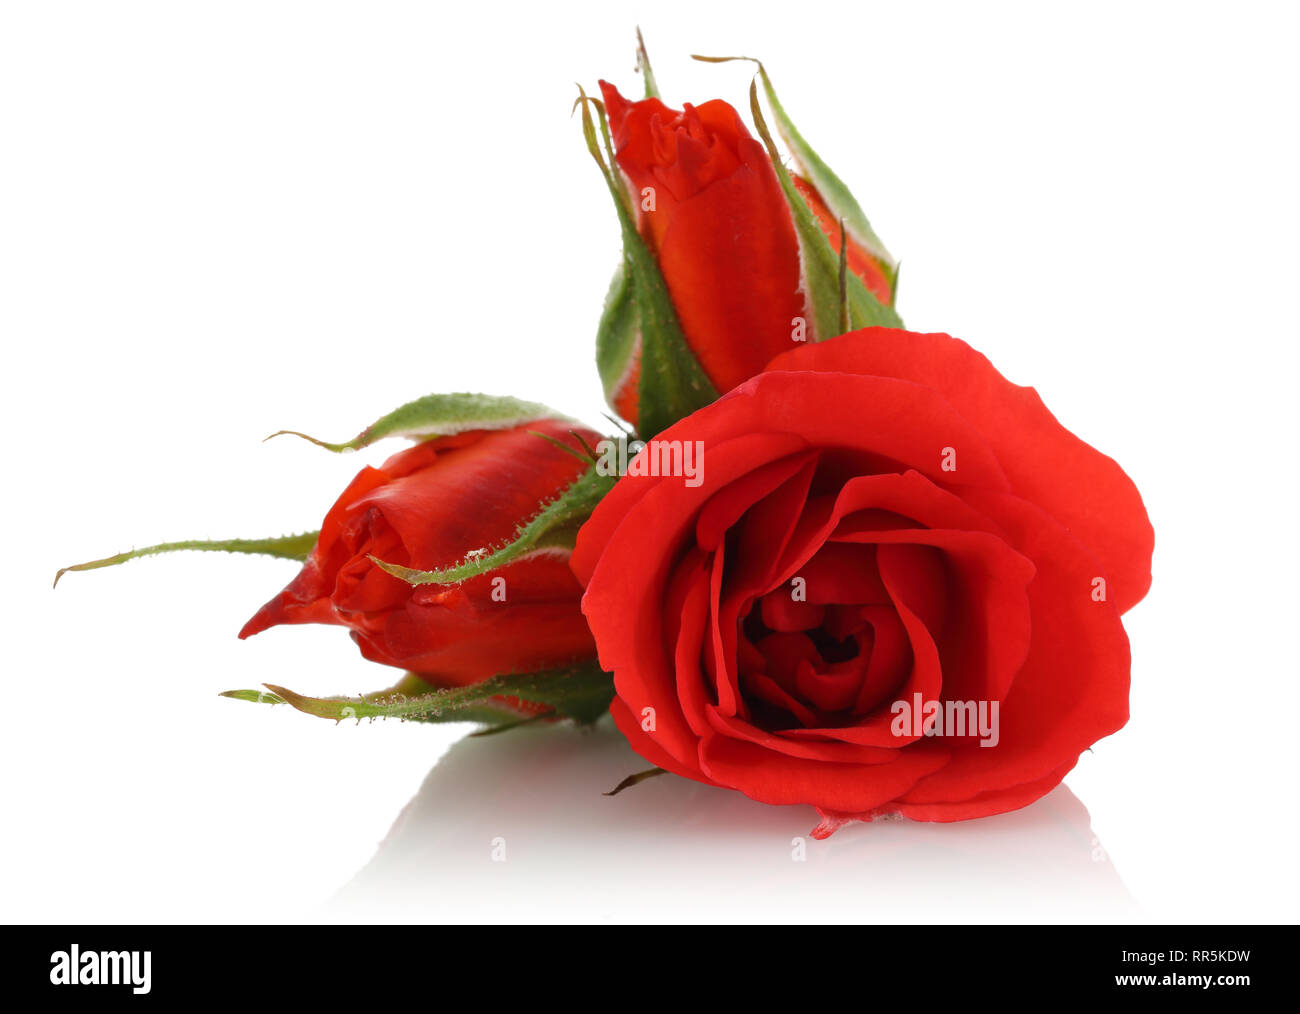 Red rose stock image. Image of isolated, object, single - 7232471